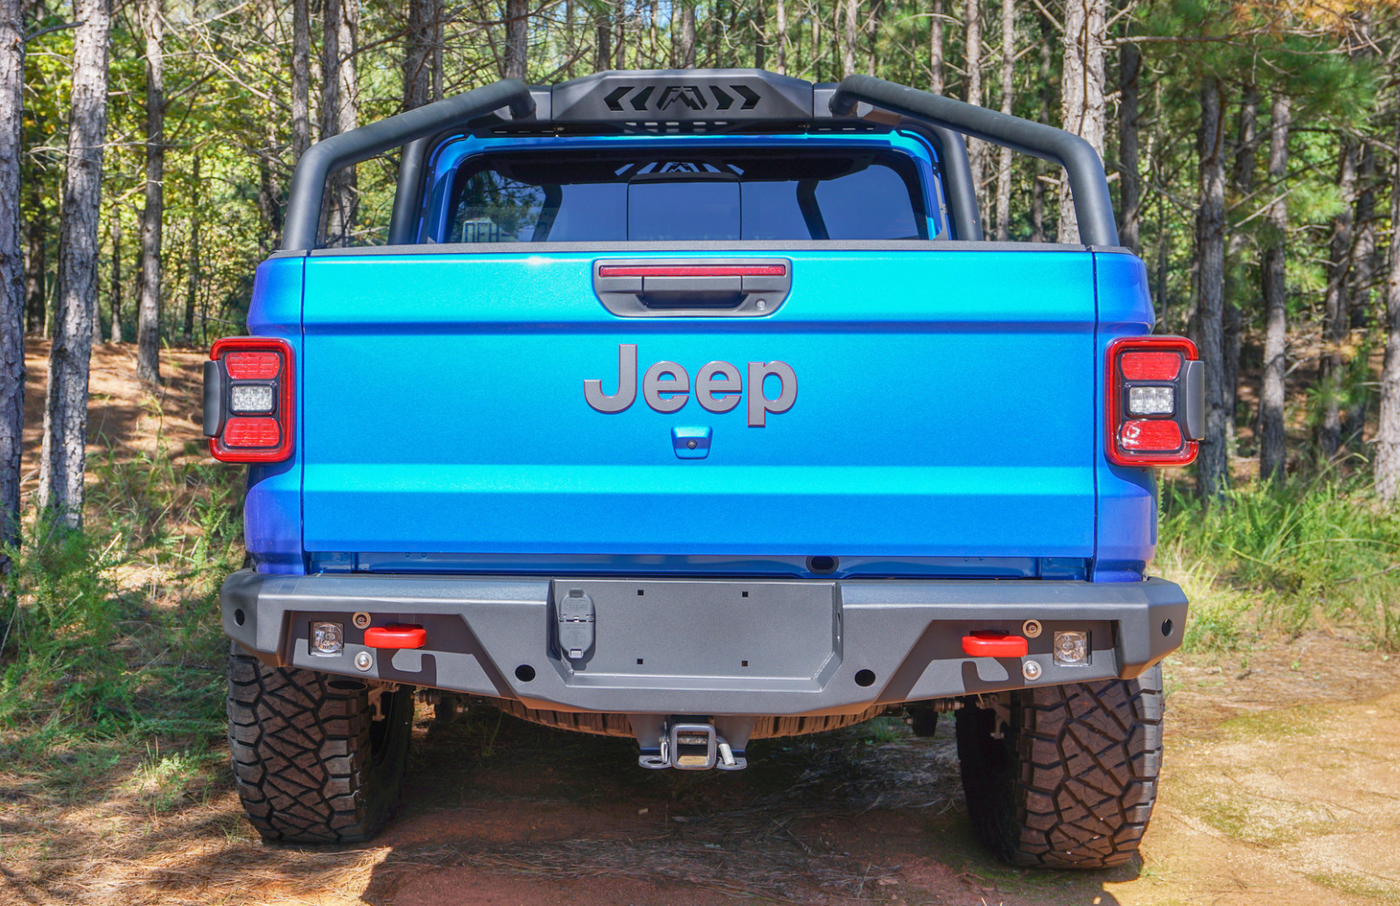 Fab Fours Sport Rack for 20-22 Jeep Gladiator JT